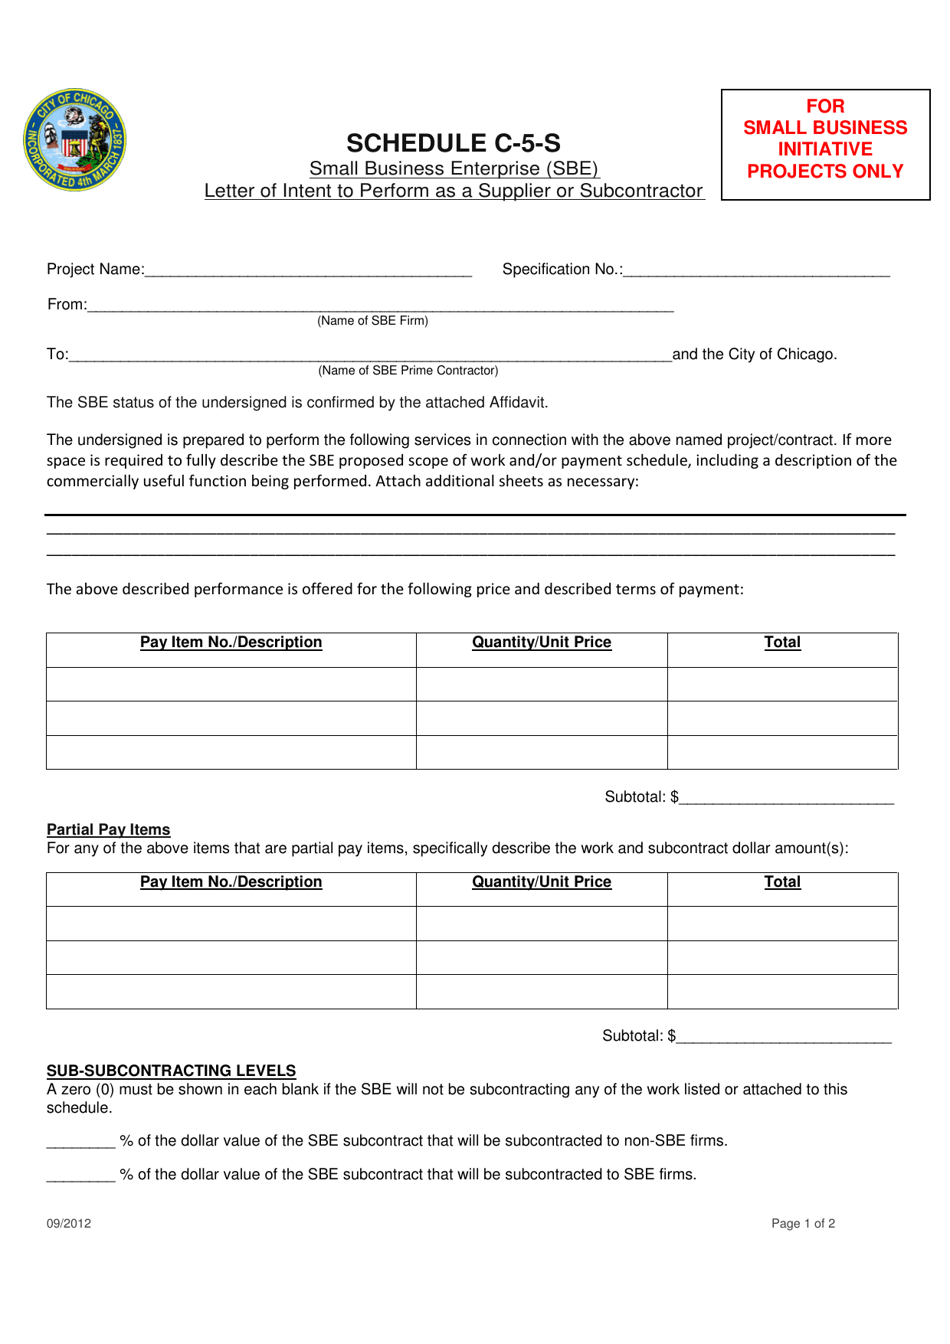 Schedule C-5-S Small Business Enterprise (Sbe) Letter of Intent to Perform as a Supplier or Subcontractor - City of Chicago, Illinois, Page 1